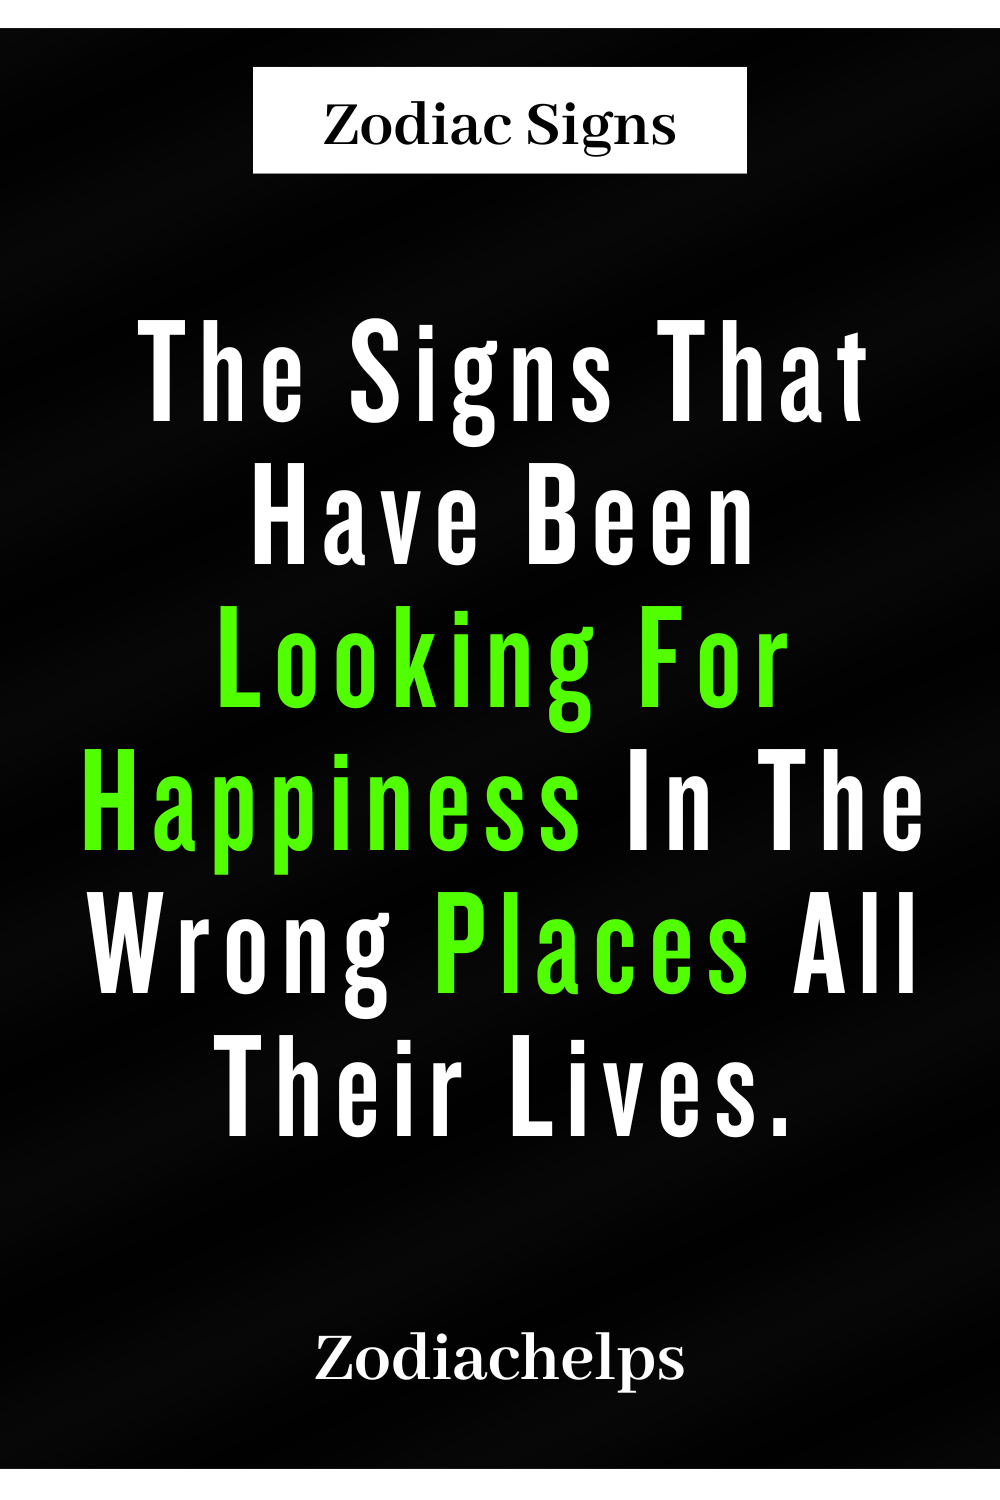 The Signs That Have Been Looking For Happiness In The Wrong Places All Their Lives.